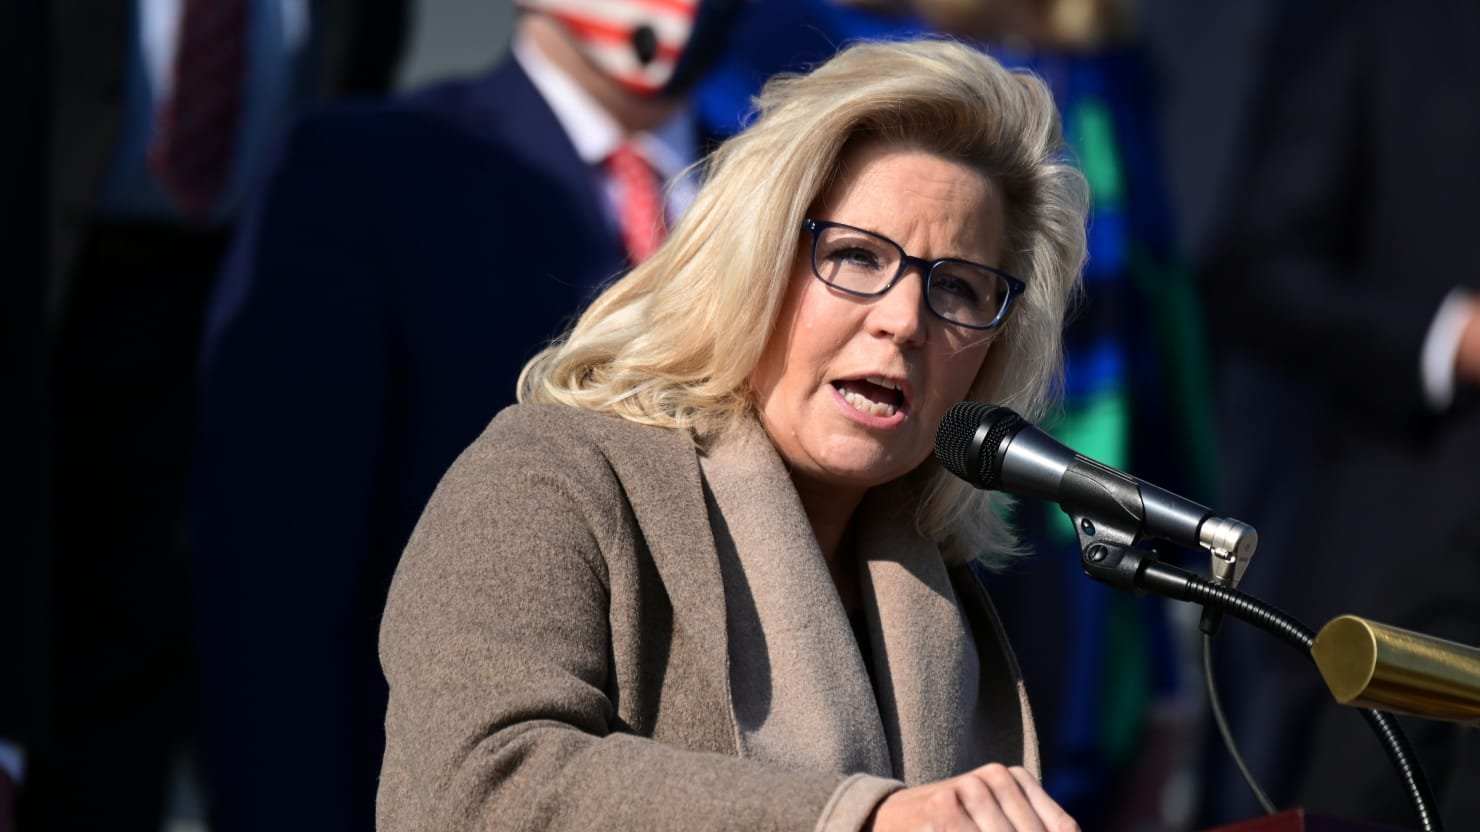 Wyoming Rep. Liz Cheney Says She Will Vote to Impeach Donald Trump Over Capitol Riot